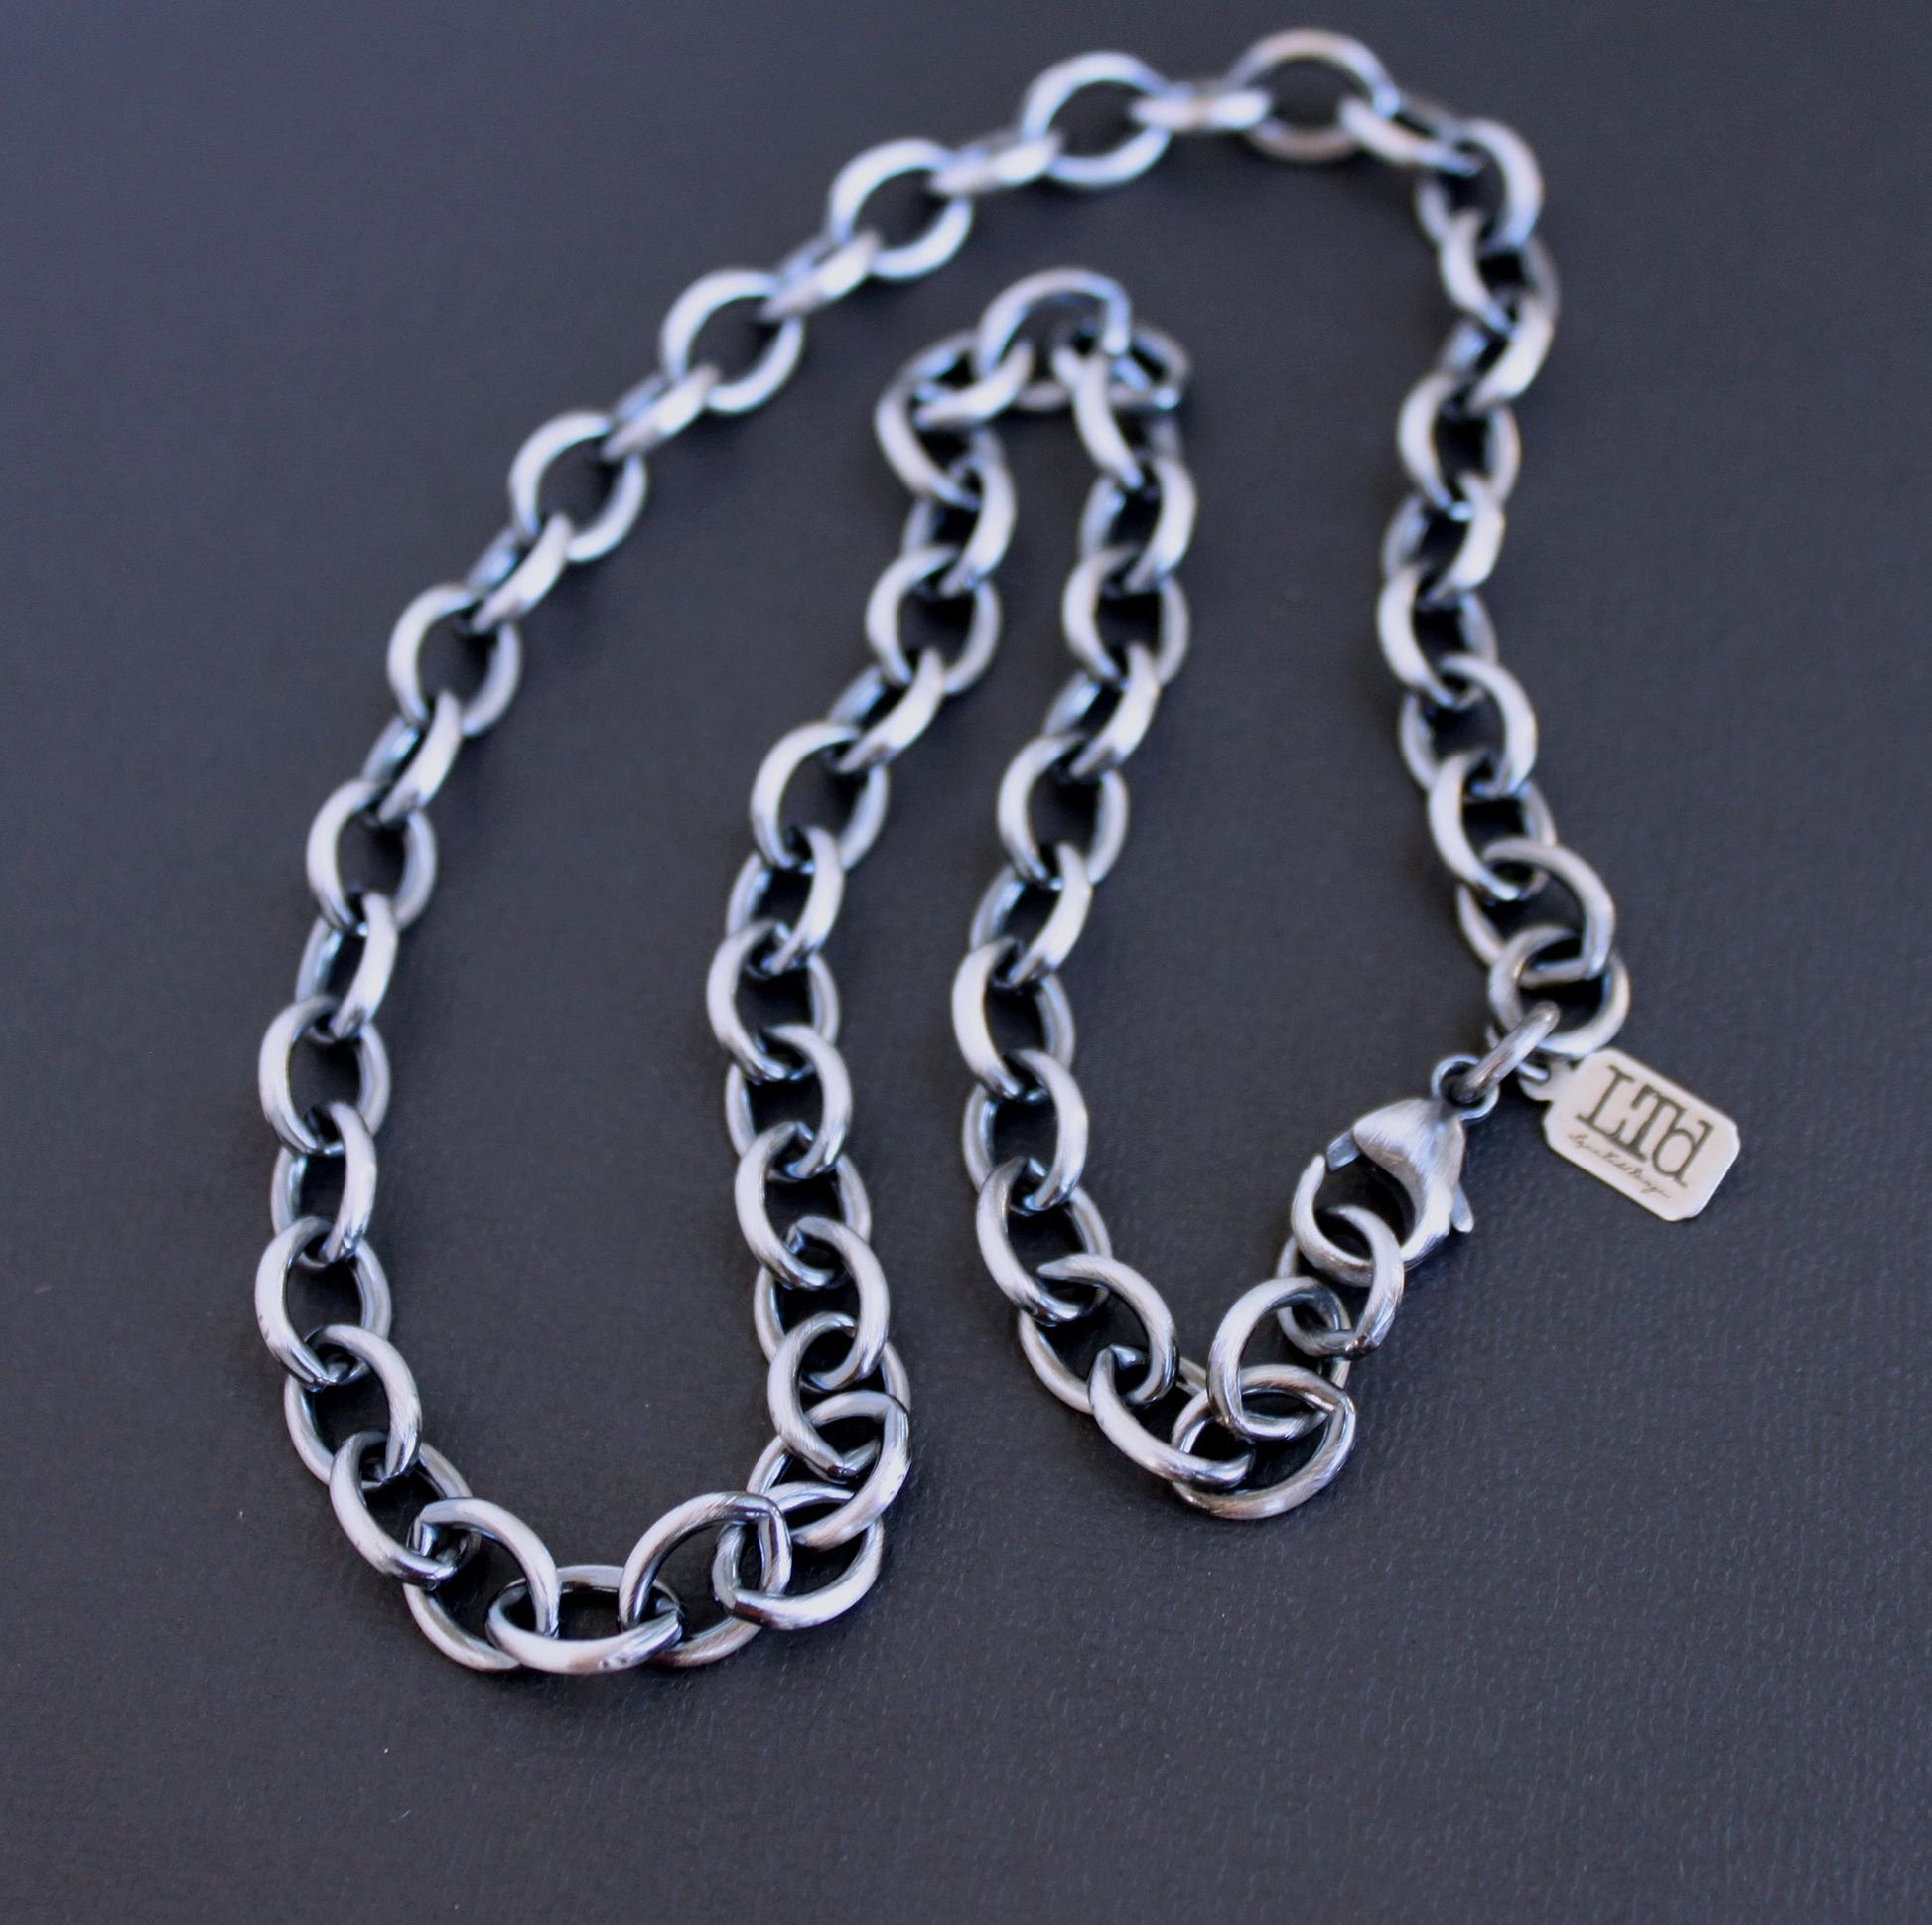 Sterling Silver Men's Link Chain Necklace